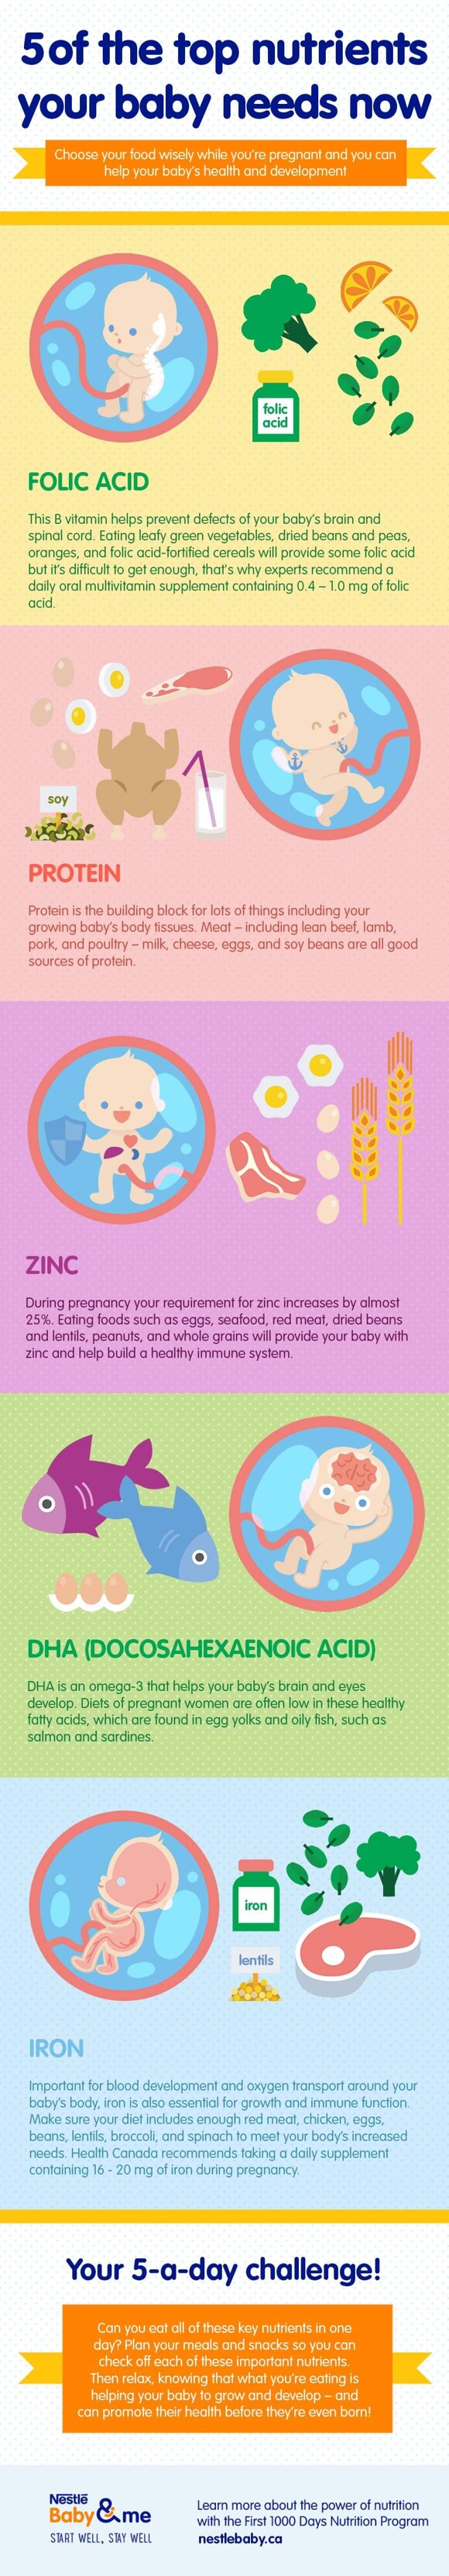 Diet during pregnancy_03_ACT_5 of the top nutrients_900px